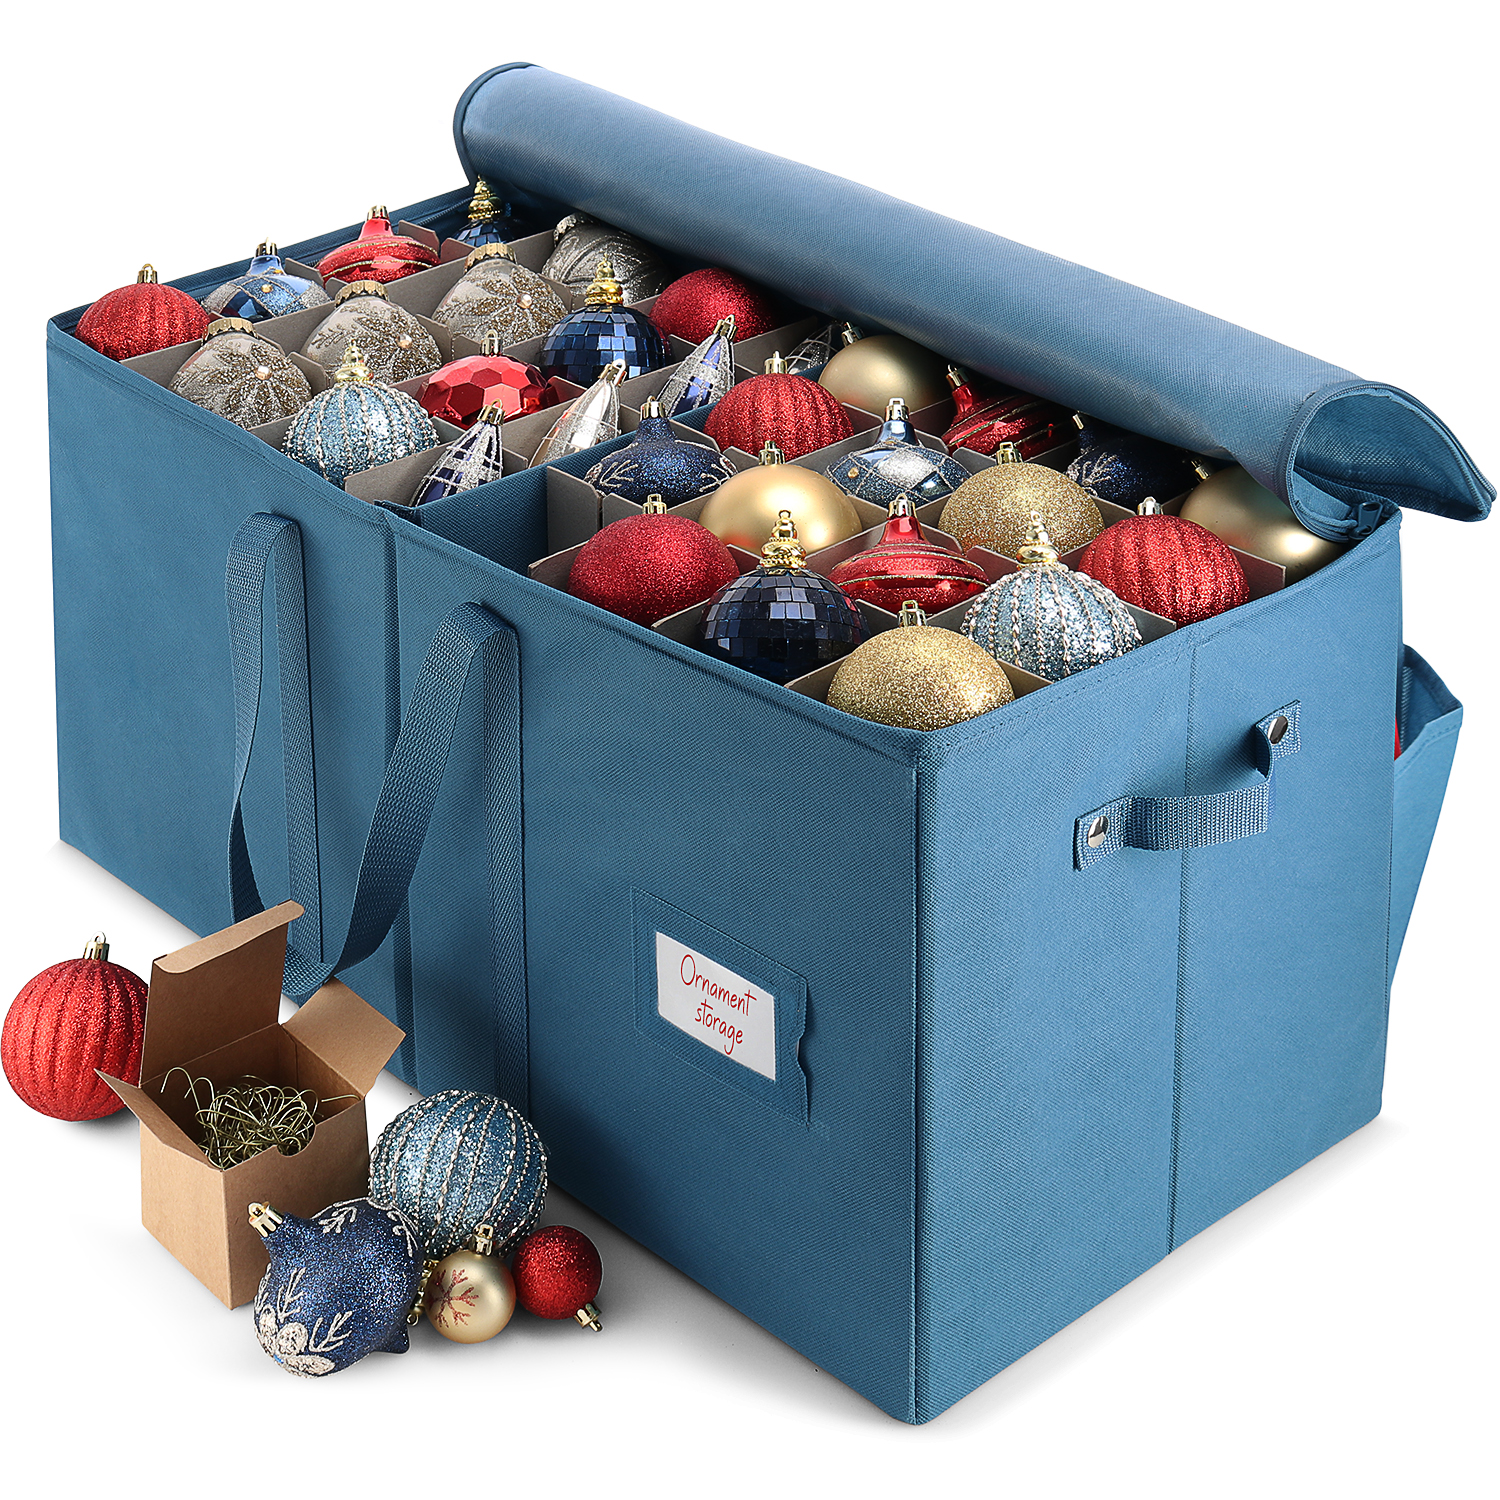 StorageBud Large Christmas Ornament Storage Box With Adjustable Dividers,  For 128 Holiday Ornaments or Decorations, Blue